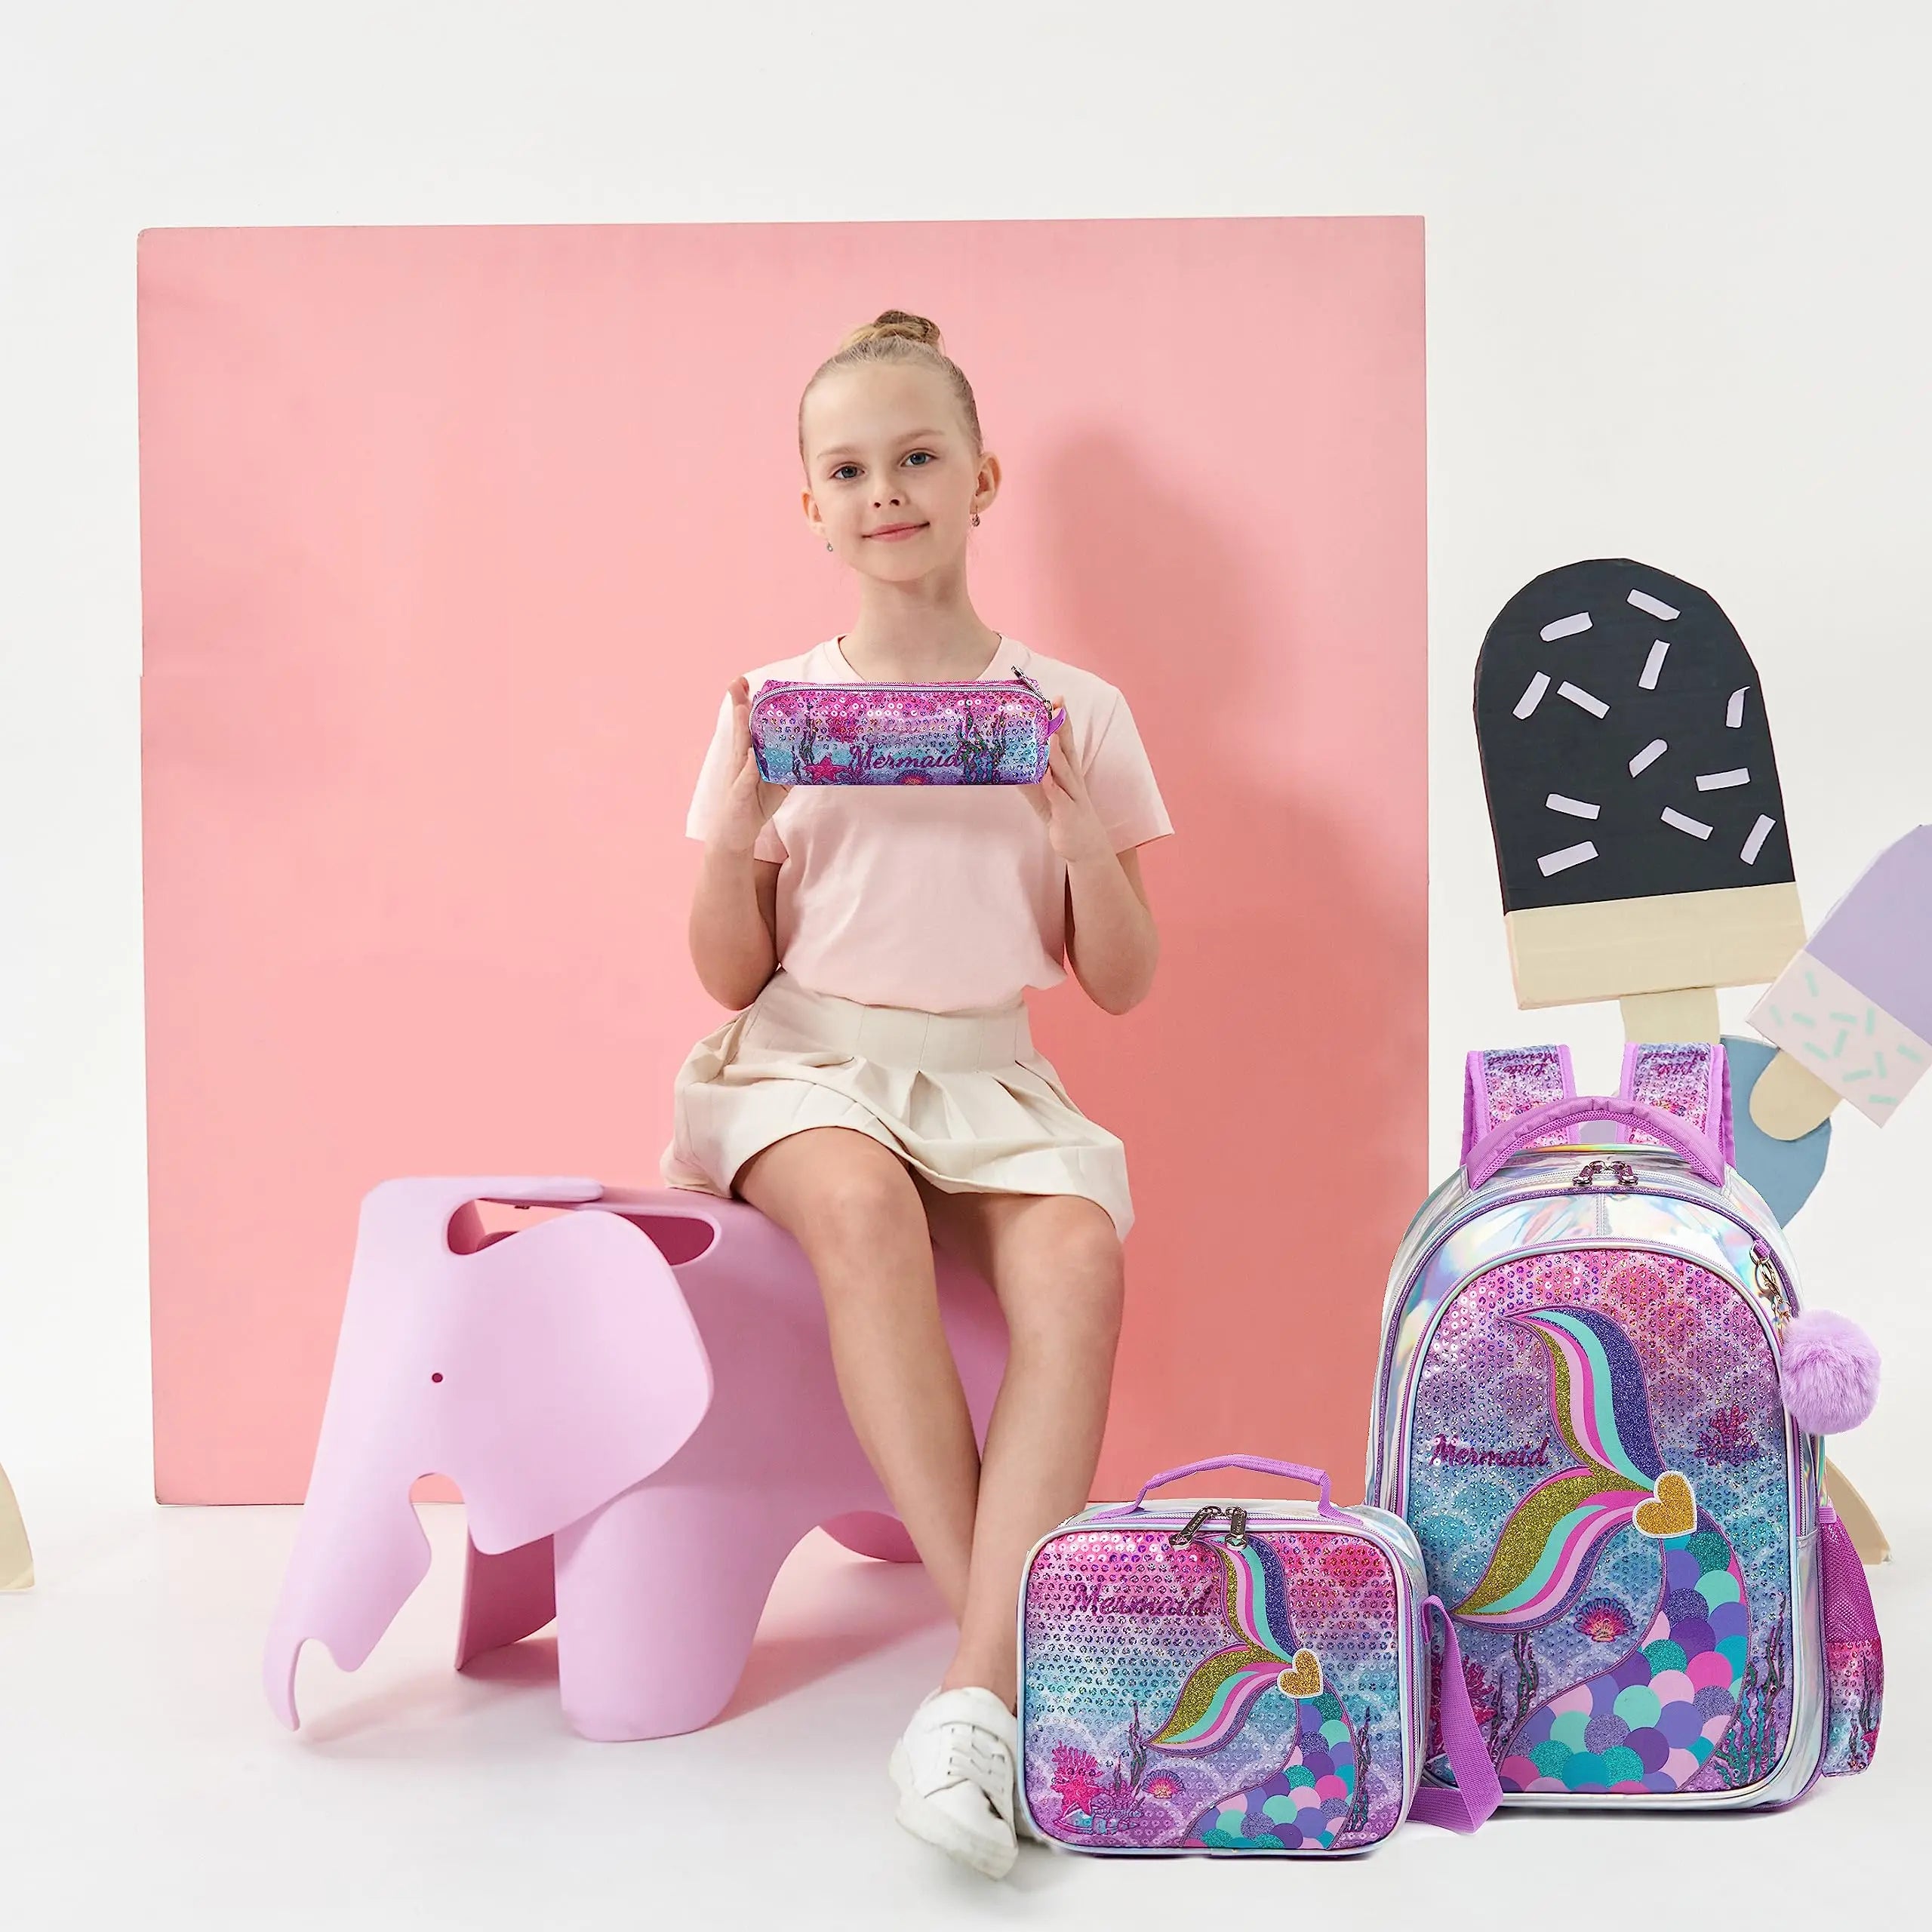 Meetbelify Mermaid Backpack Set for Girls - School Bag with Lunch Box, Ideal for Elementary Students (Ages 5-8)